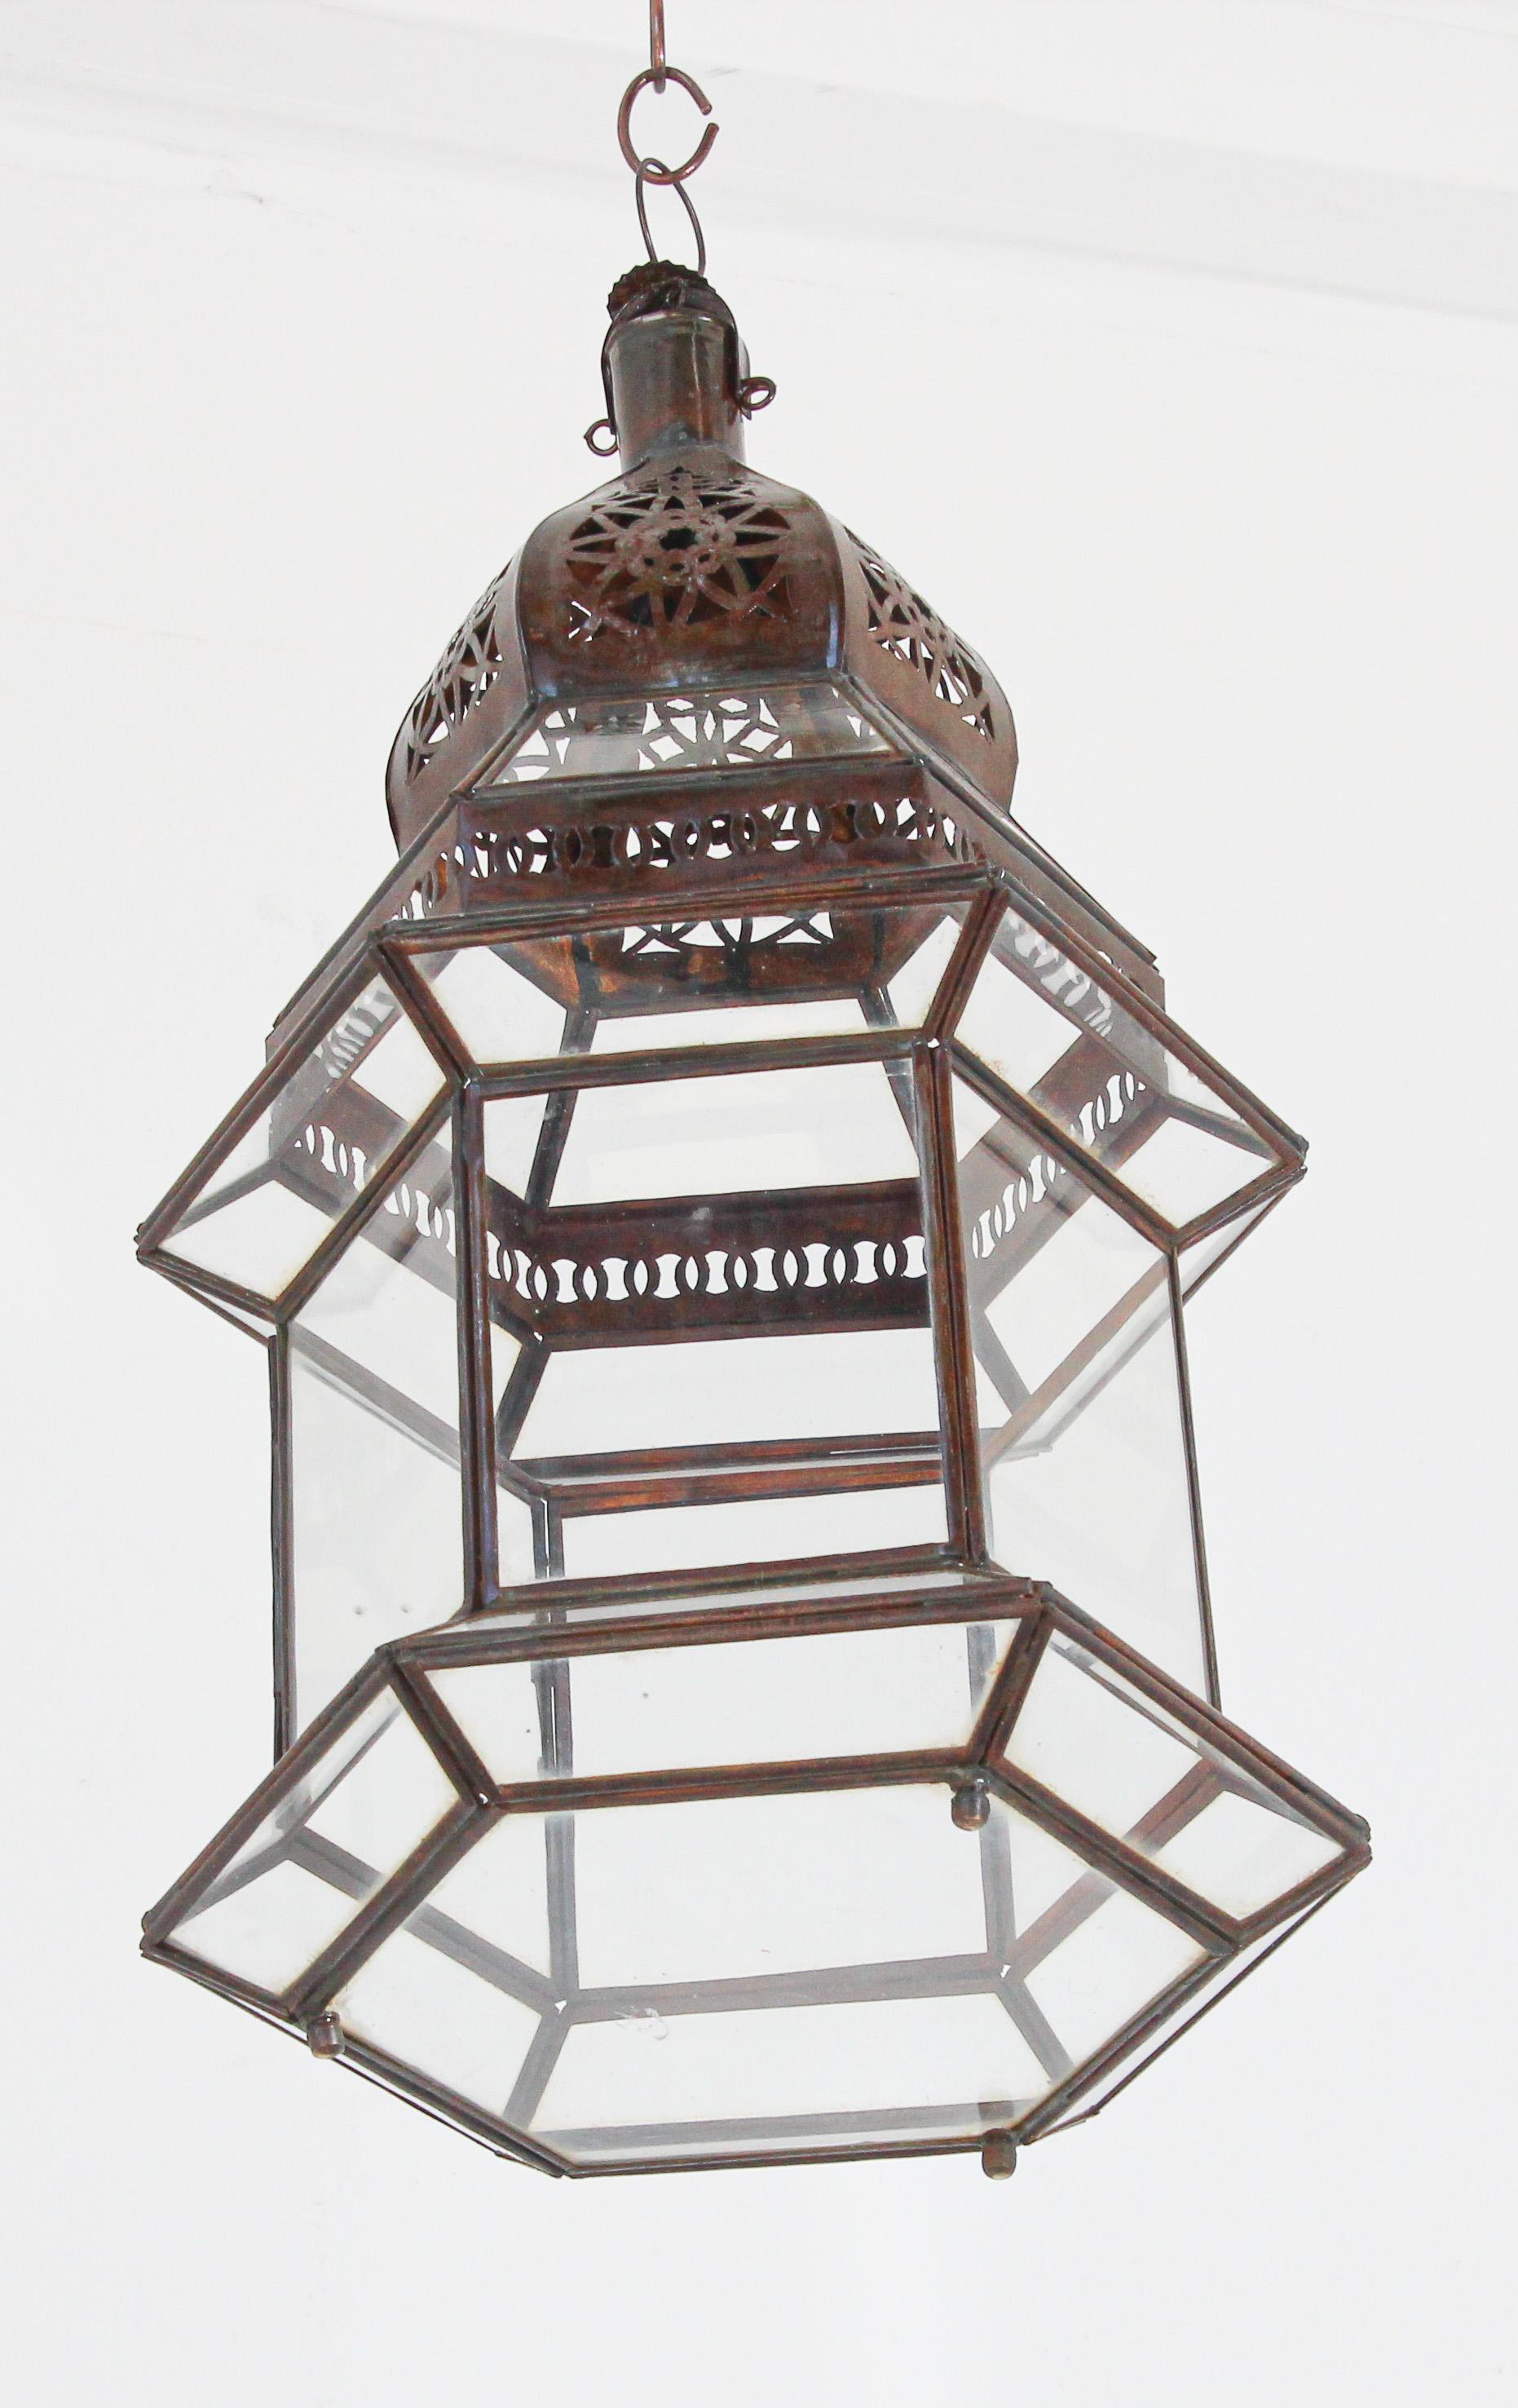 Moroccan metal and clear glass hanging candle lantern.
Hurricane candle lamp in hexagonal shape with vintage rust color metal finish.
The top of the lantern is hand-cut with Moorish designs.
The lantern has a small door to access the inside to use